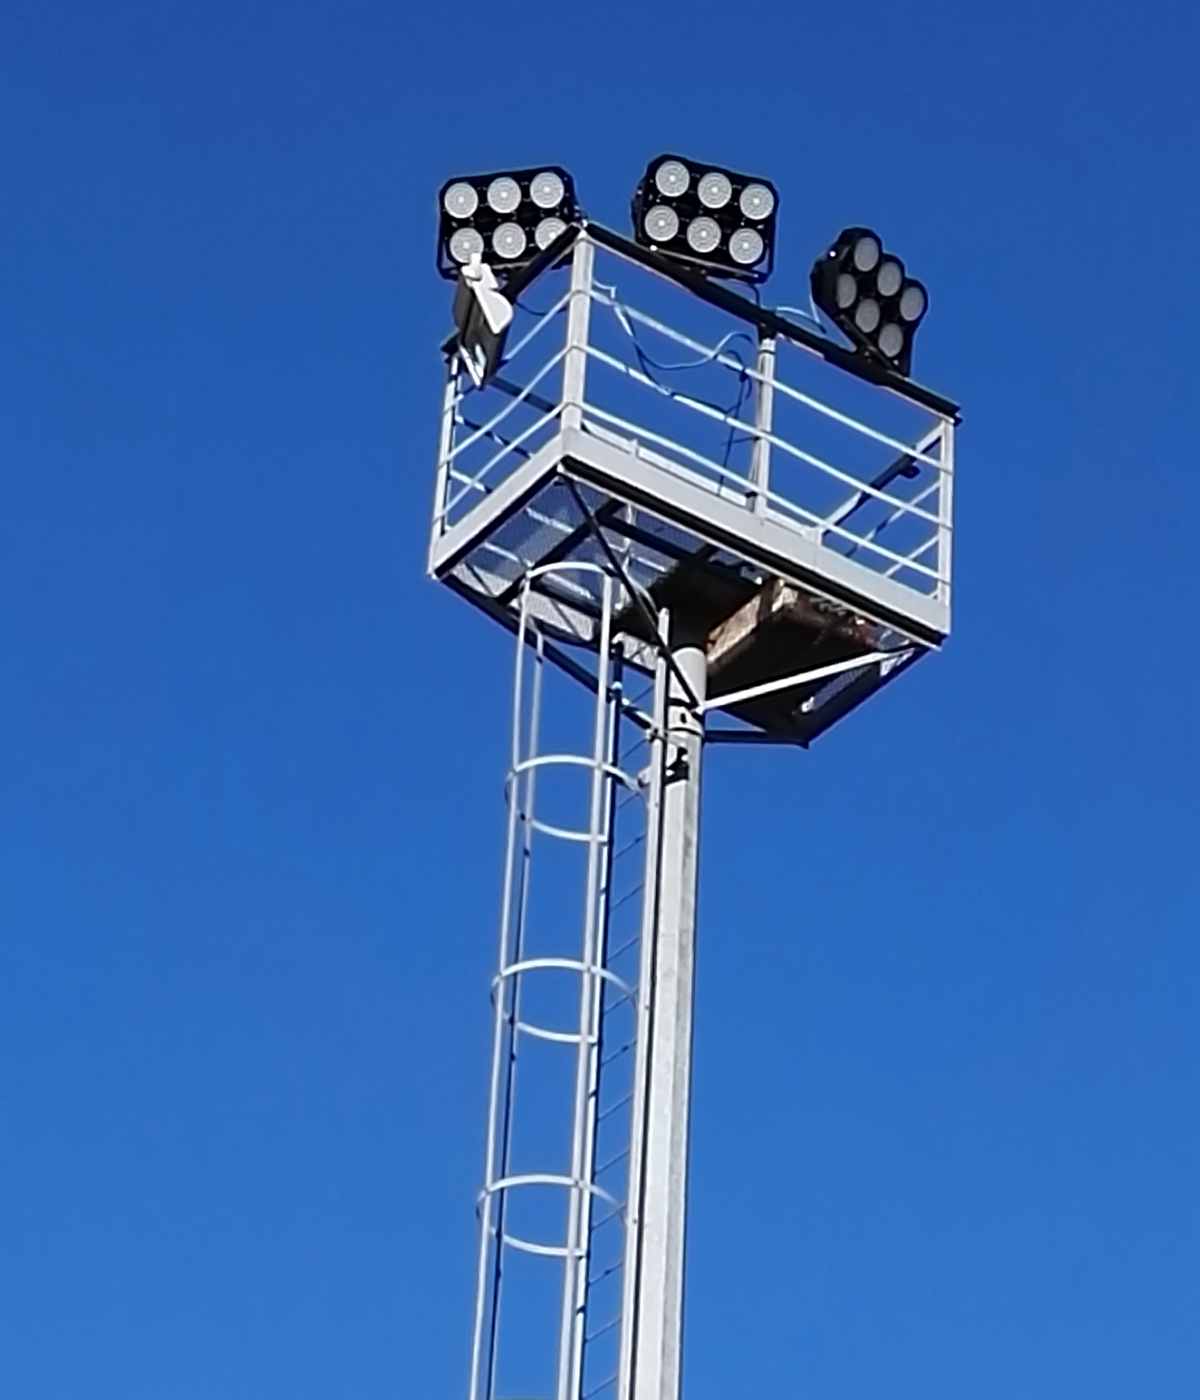 LED Stadium Light Project In Italy